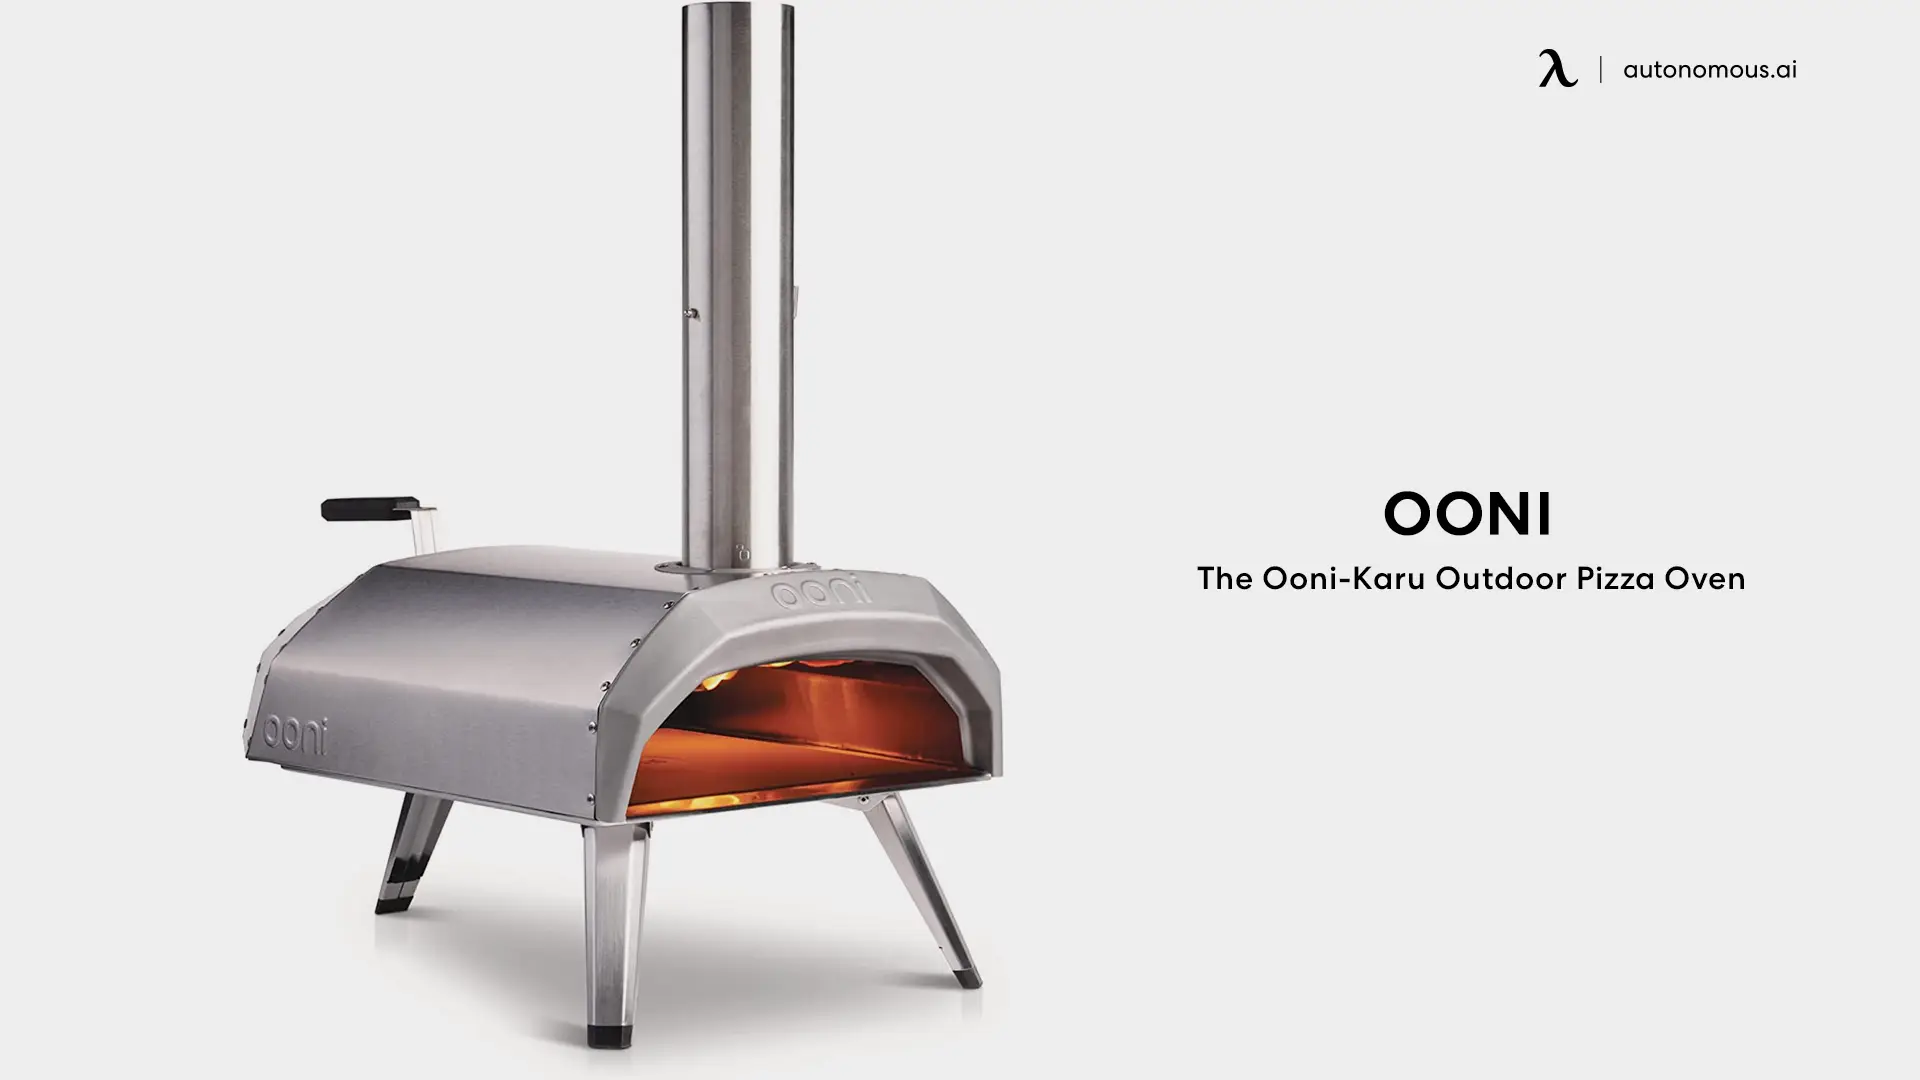 The Ooni-Karu Outdoor Pizza Oven